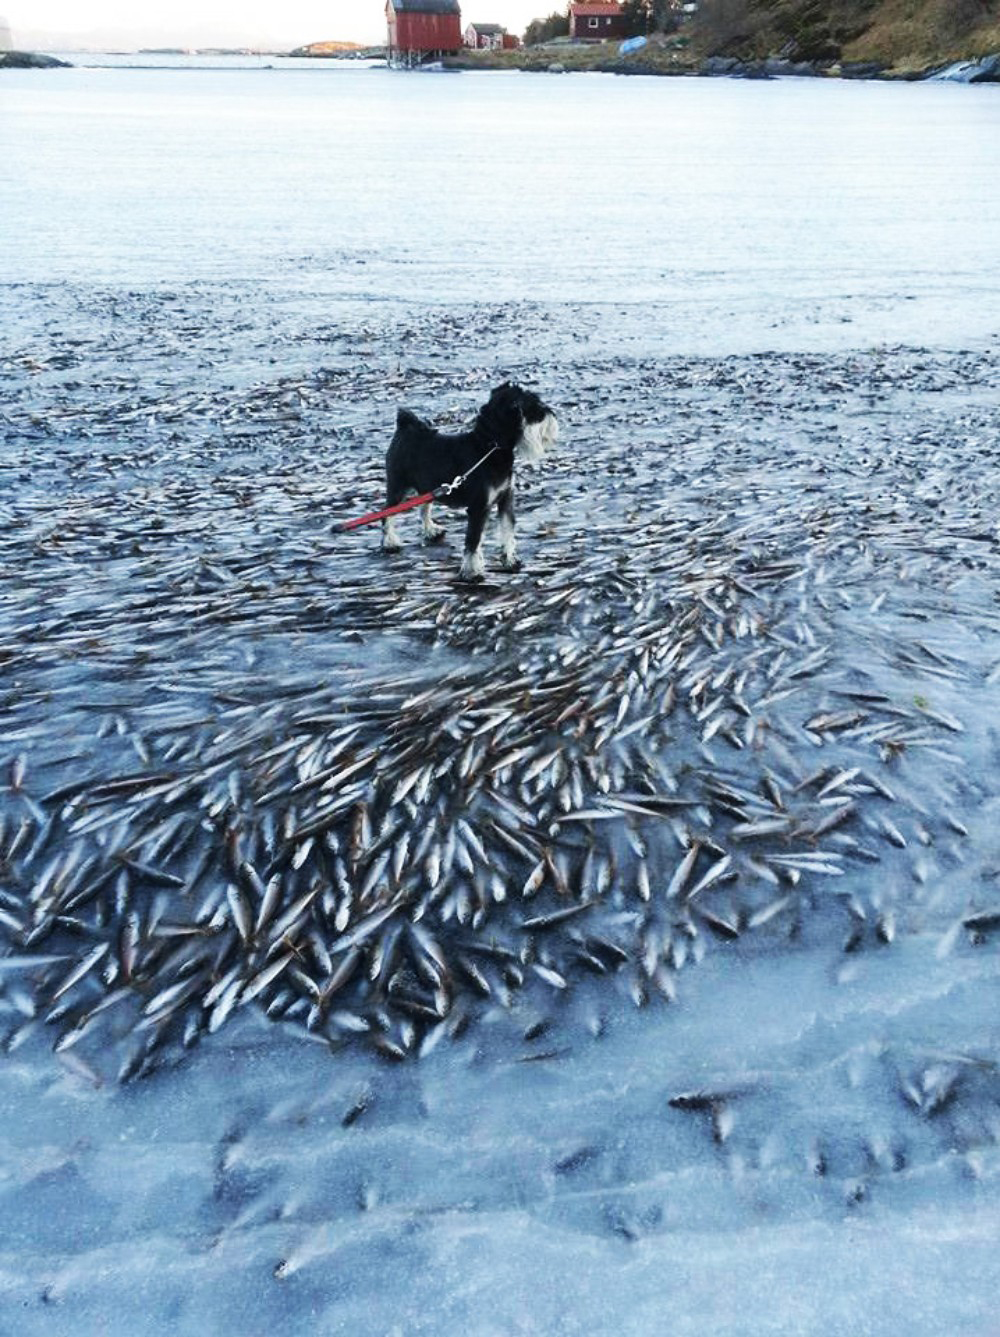 The Sea Froze So Fast That It Killed Thousands Of Fish Instantly